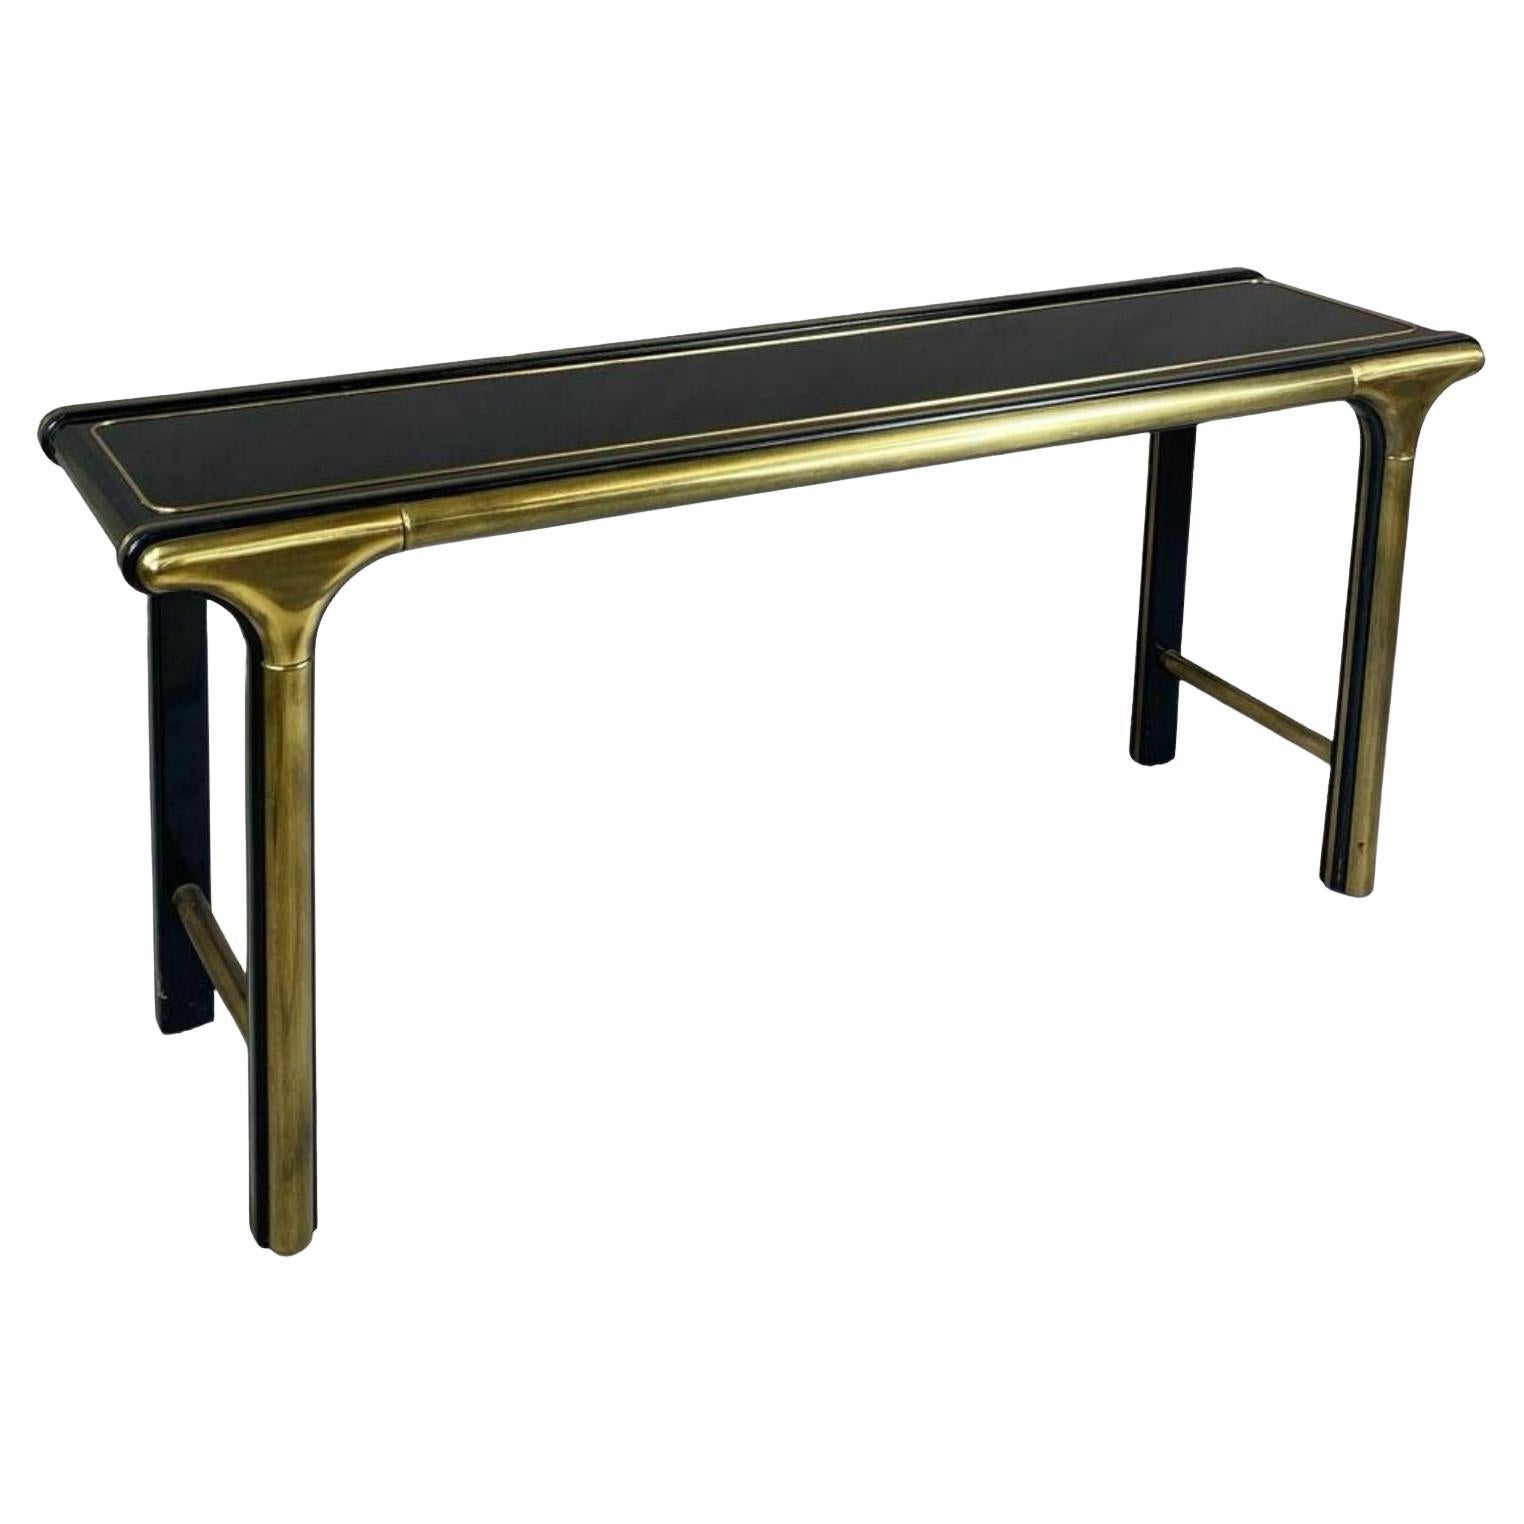 Modern Brass And Lacquer Console Table By William Doezema For Mastercraft For Sale